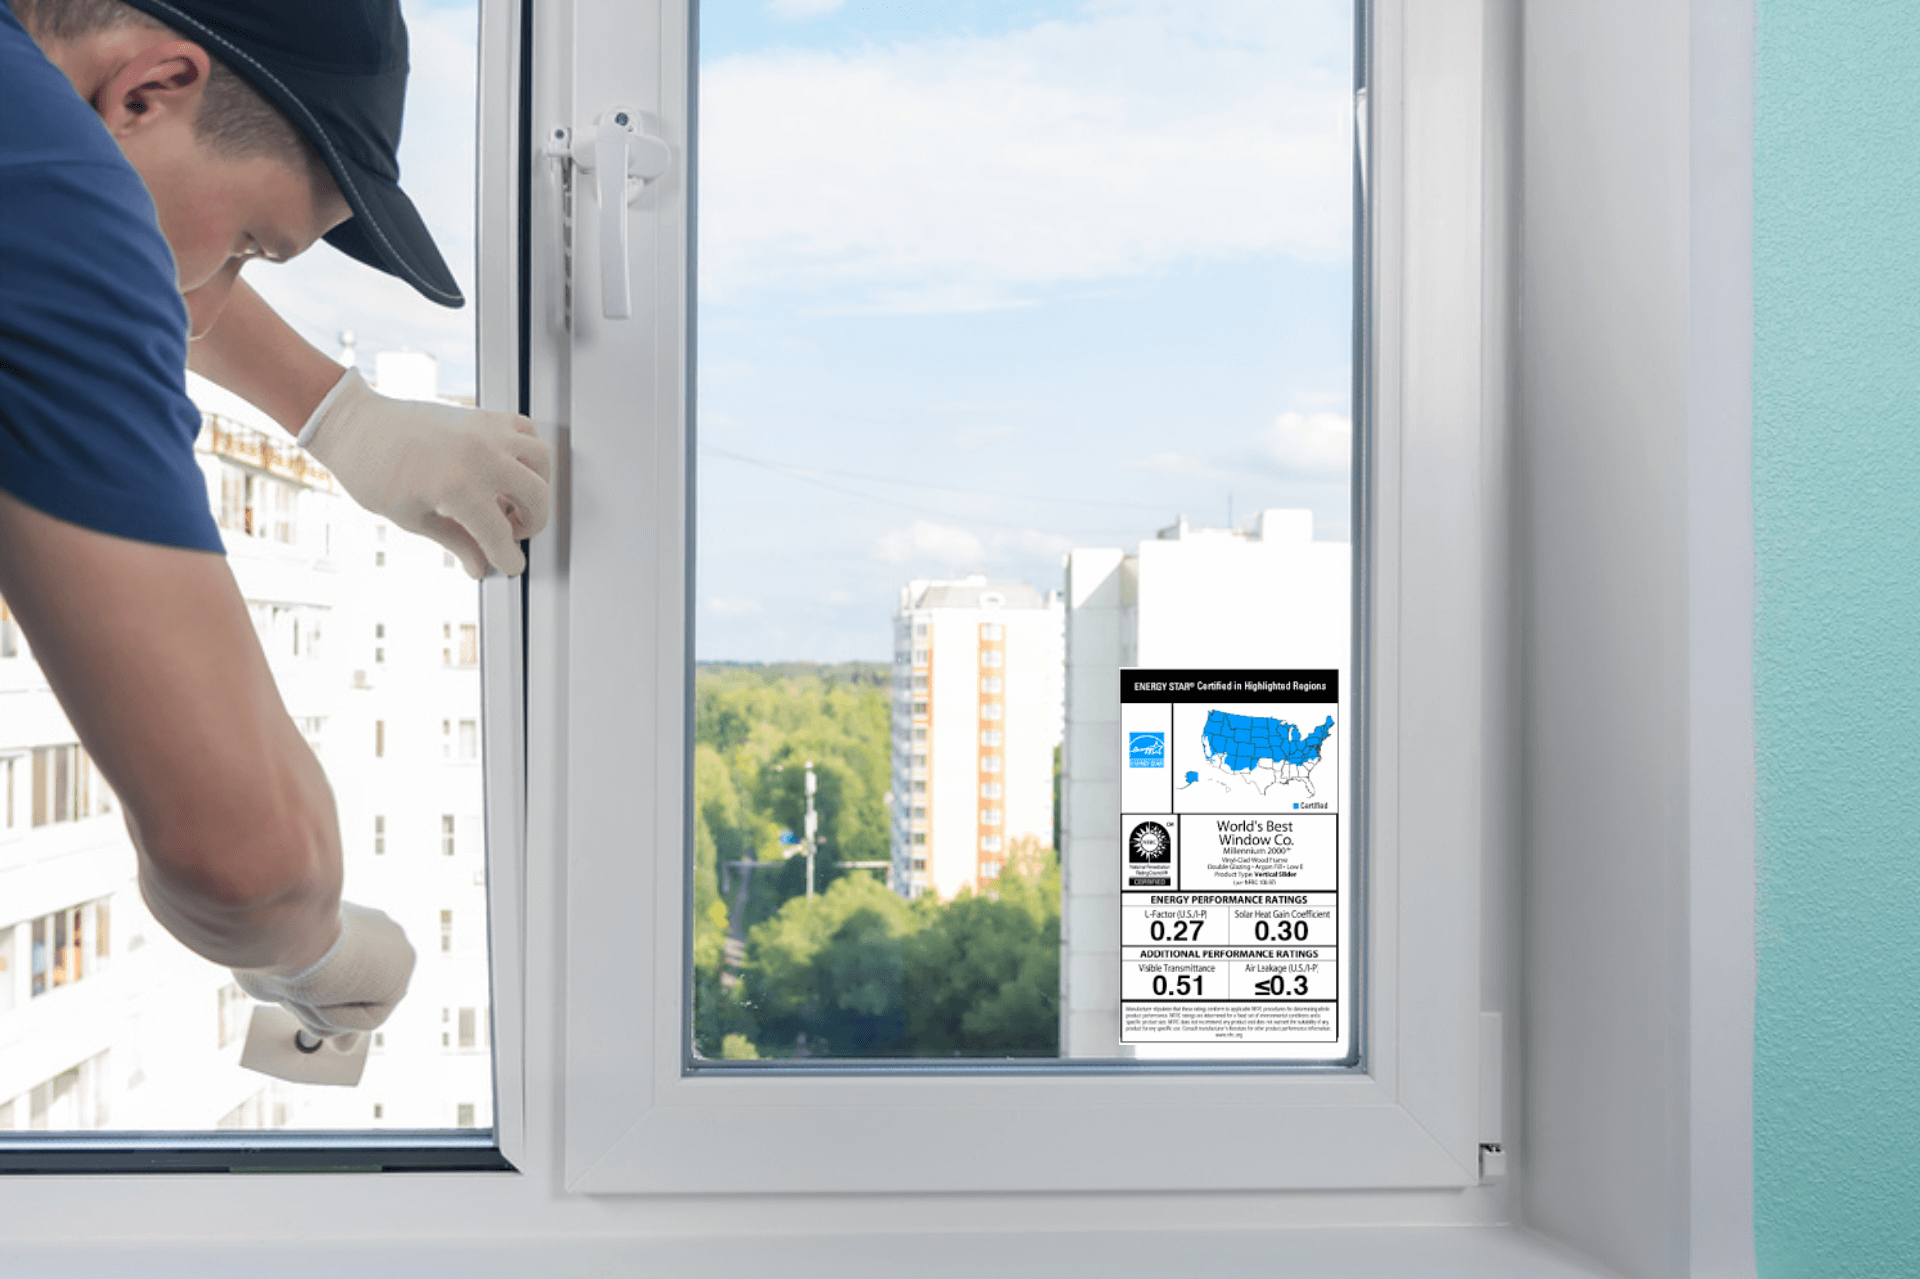 How to Read a Window Energy Performance Label